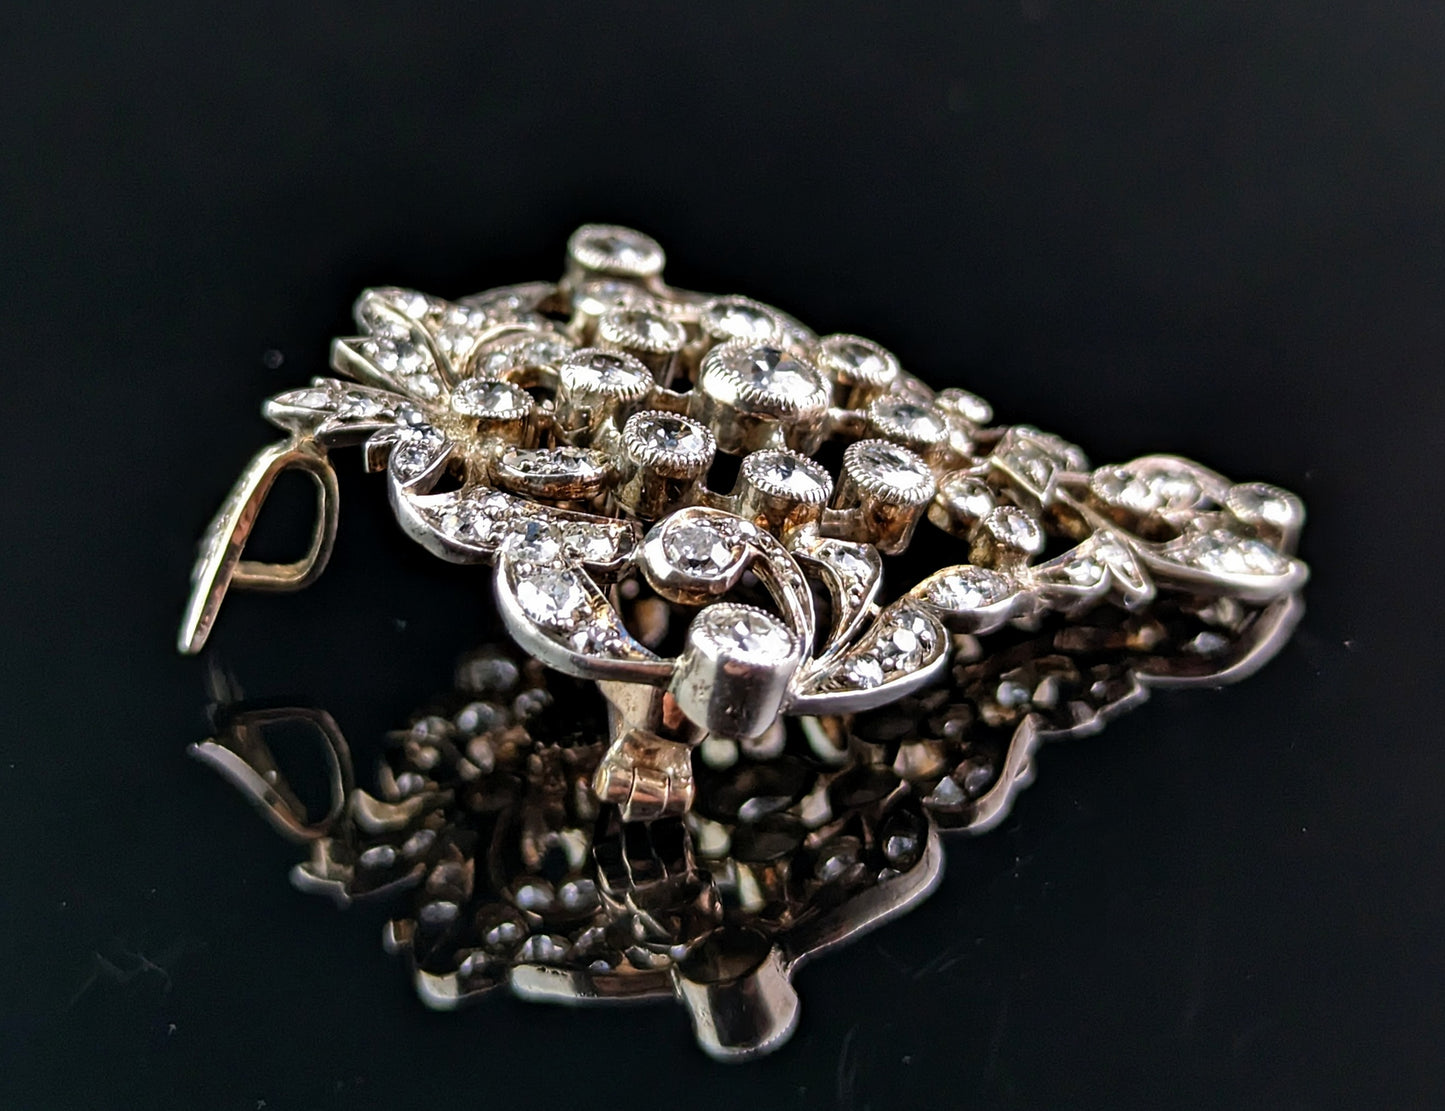 Antique Victorian Diamond pendant brooch, Bunch of grapes, 9ct gold and silver